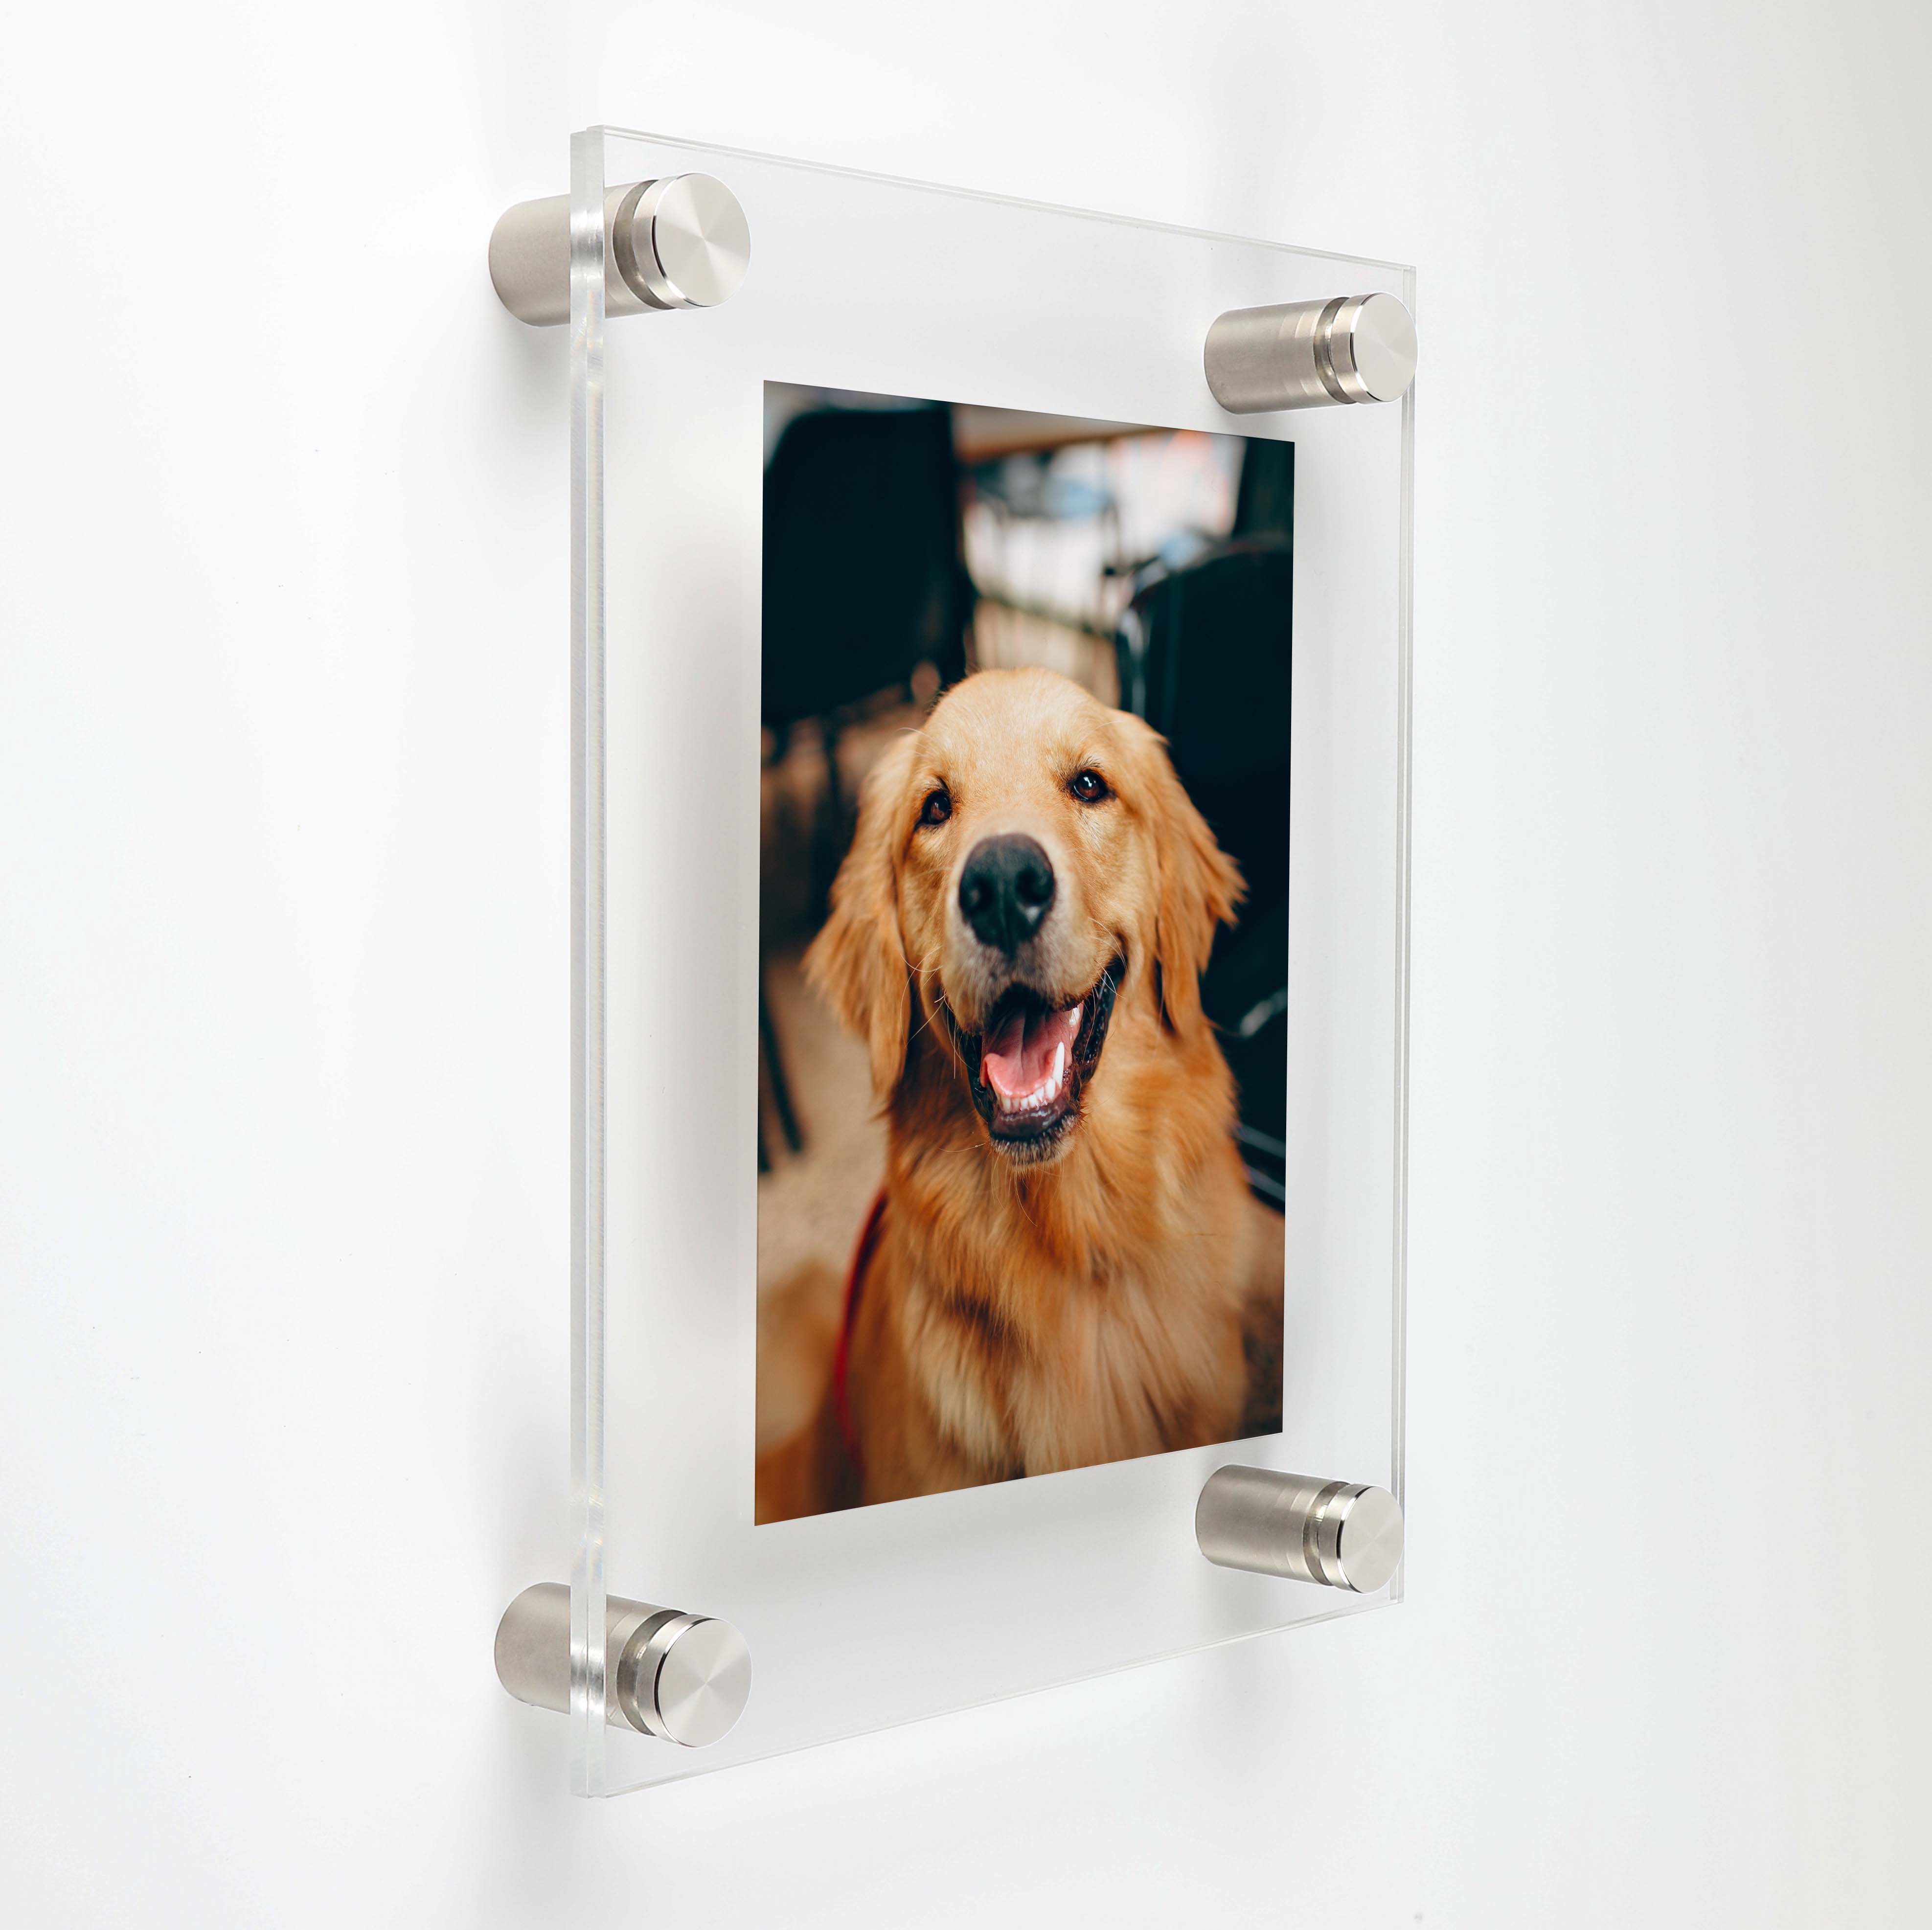 (2) 27'' x 39'' Clear Acrylics , Pre-Drilled With Polished Edges (Thick 3/16'' each), Wall Frame with (6) 5/8'' x 3/4'' Brushed Stainless Steel Standoffs includes Screws and Anchors